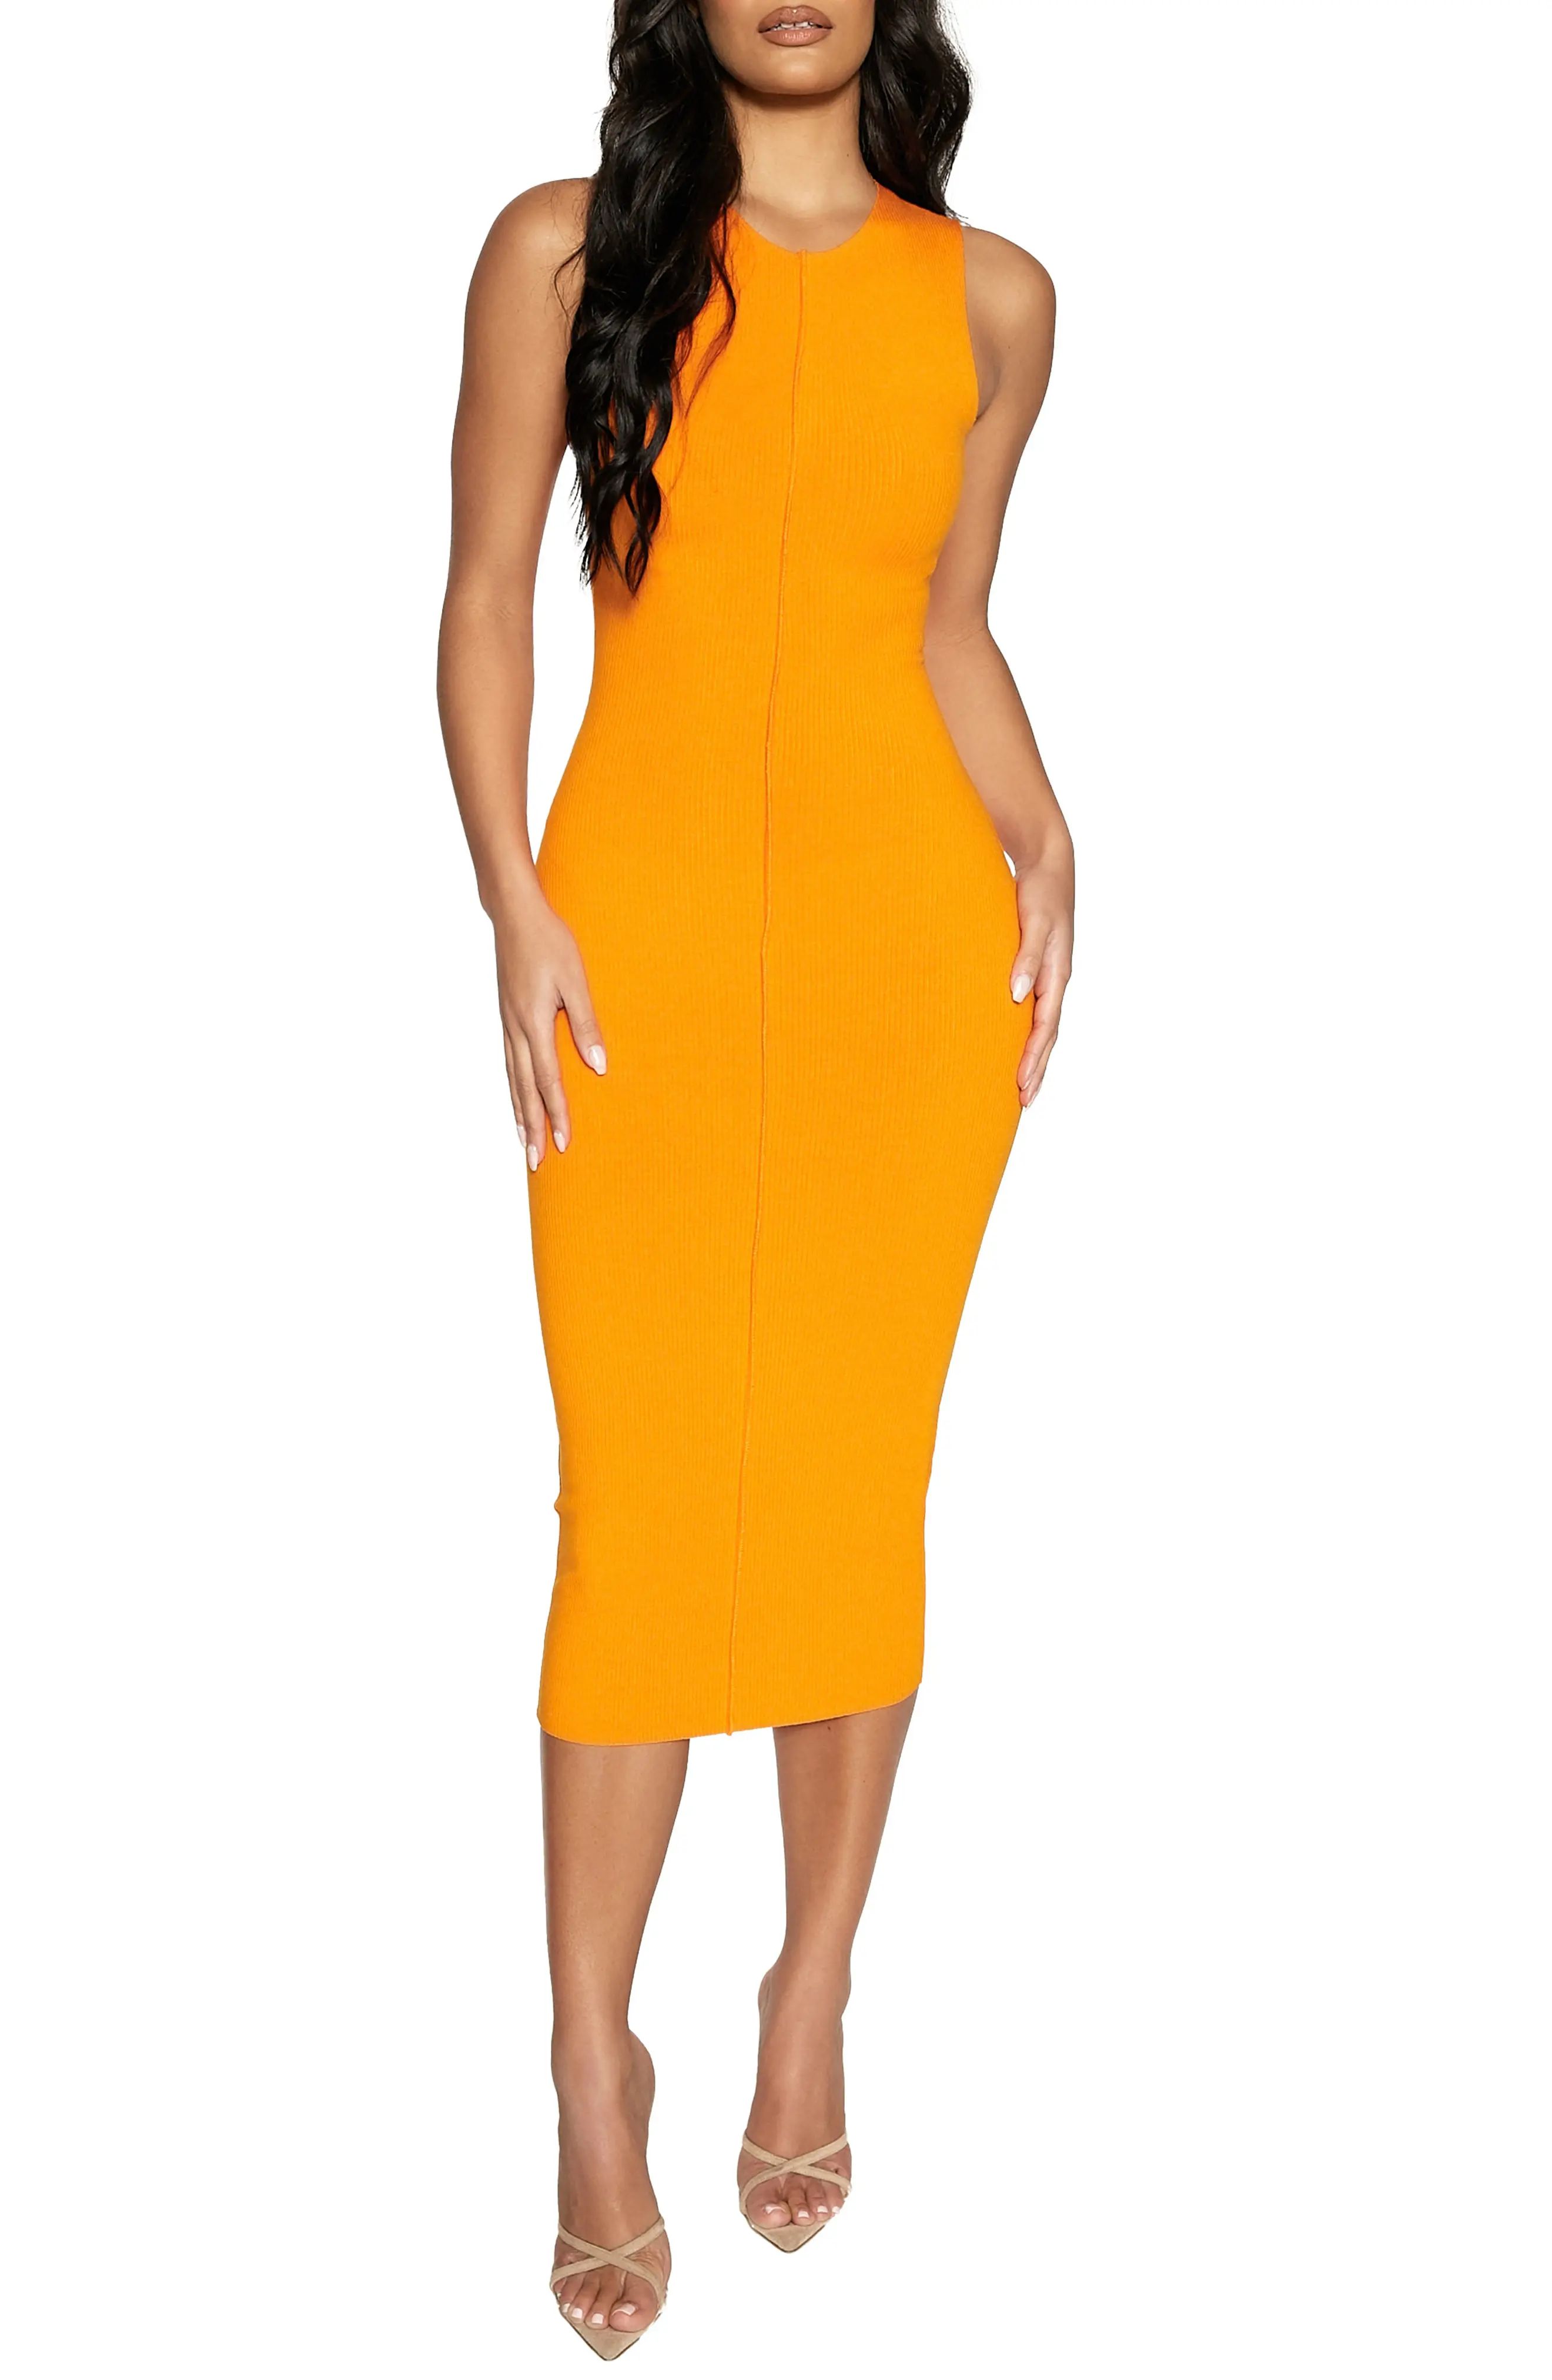 Naked Wardrobe All Snatched Up Sleeveless Body-Con Dress in Orange at Nordstrom, Size Medium | Nordstrom